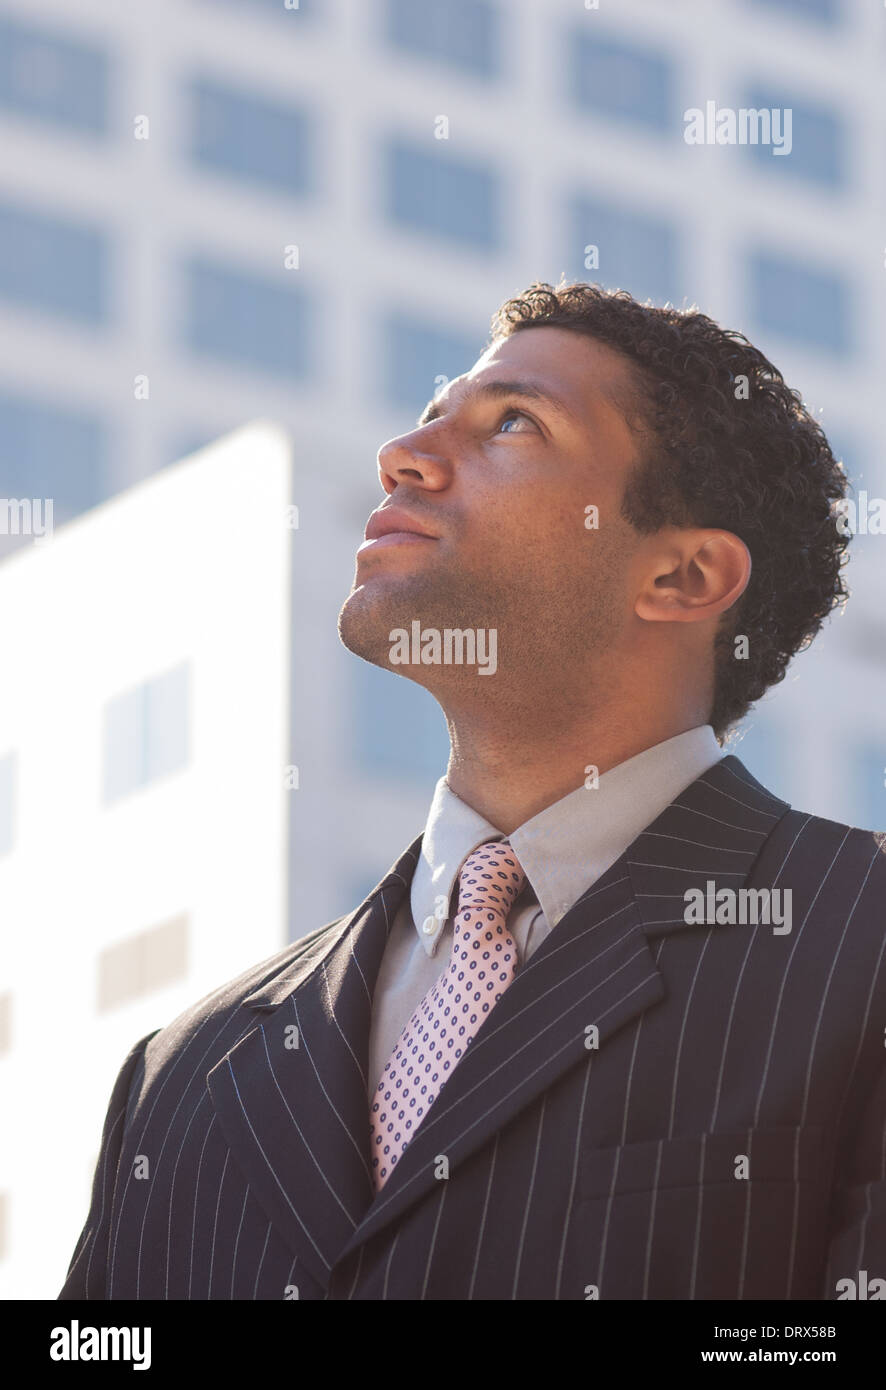 black business man looking up portrait taken against a business building background. He looks ambitious and goal oriented. Stock Photo